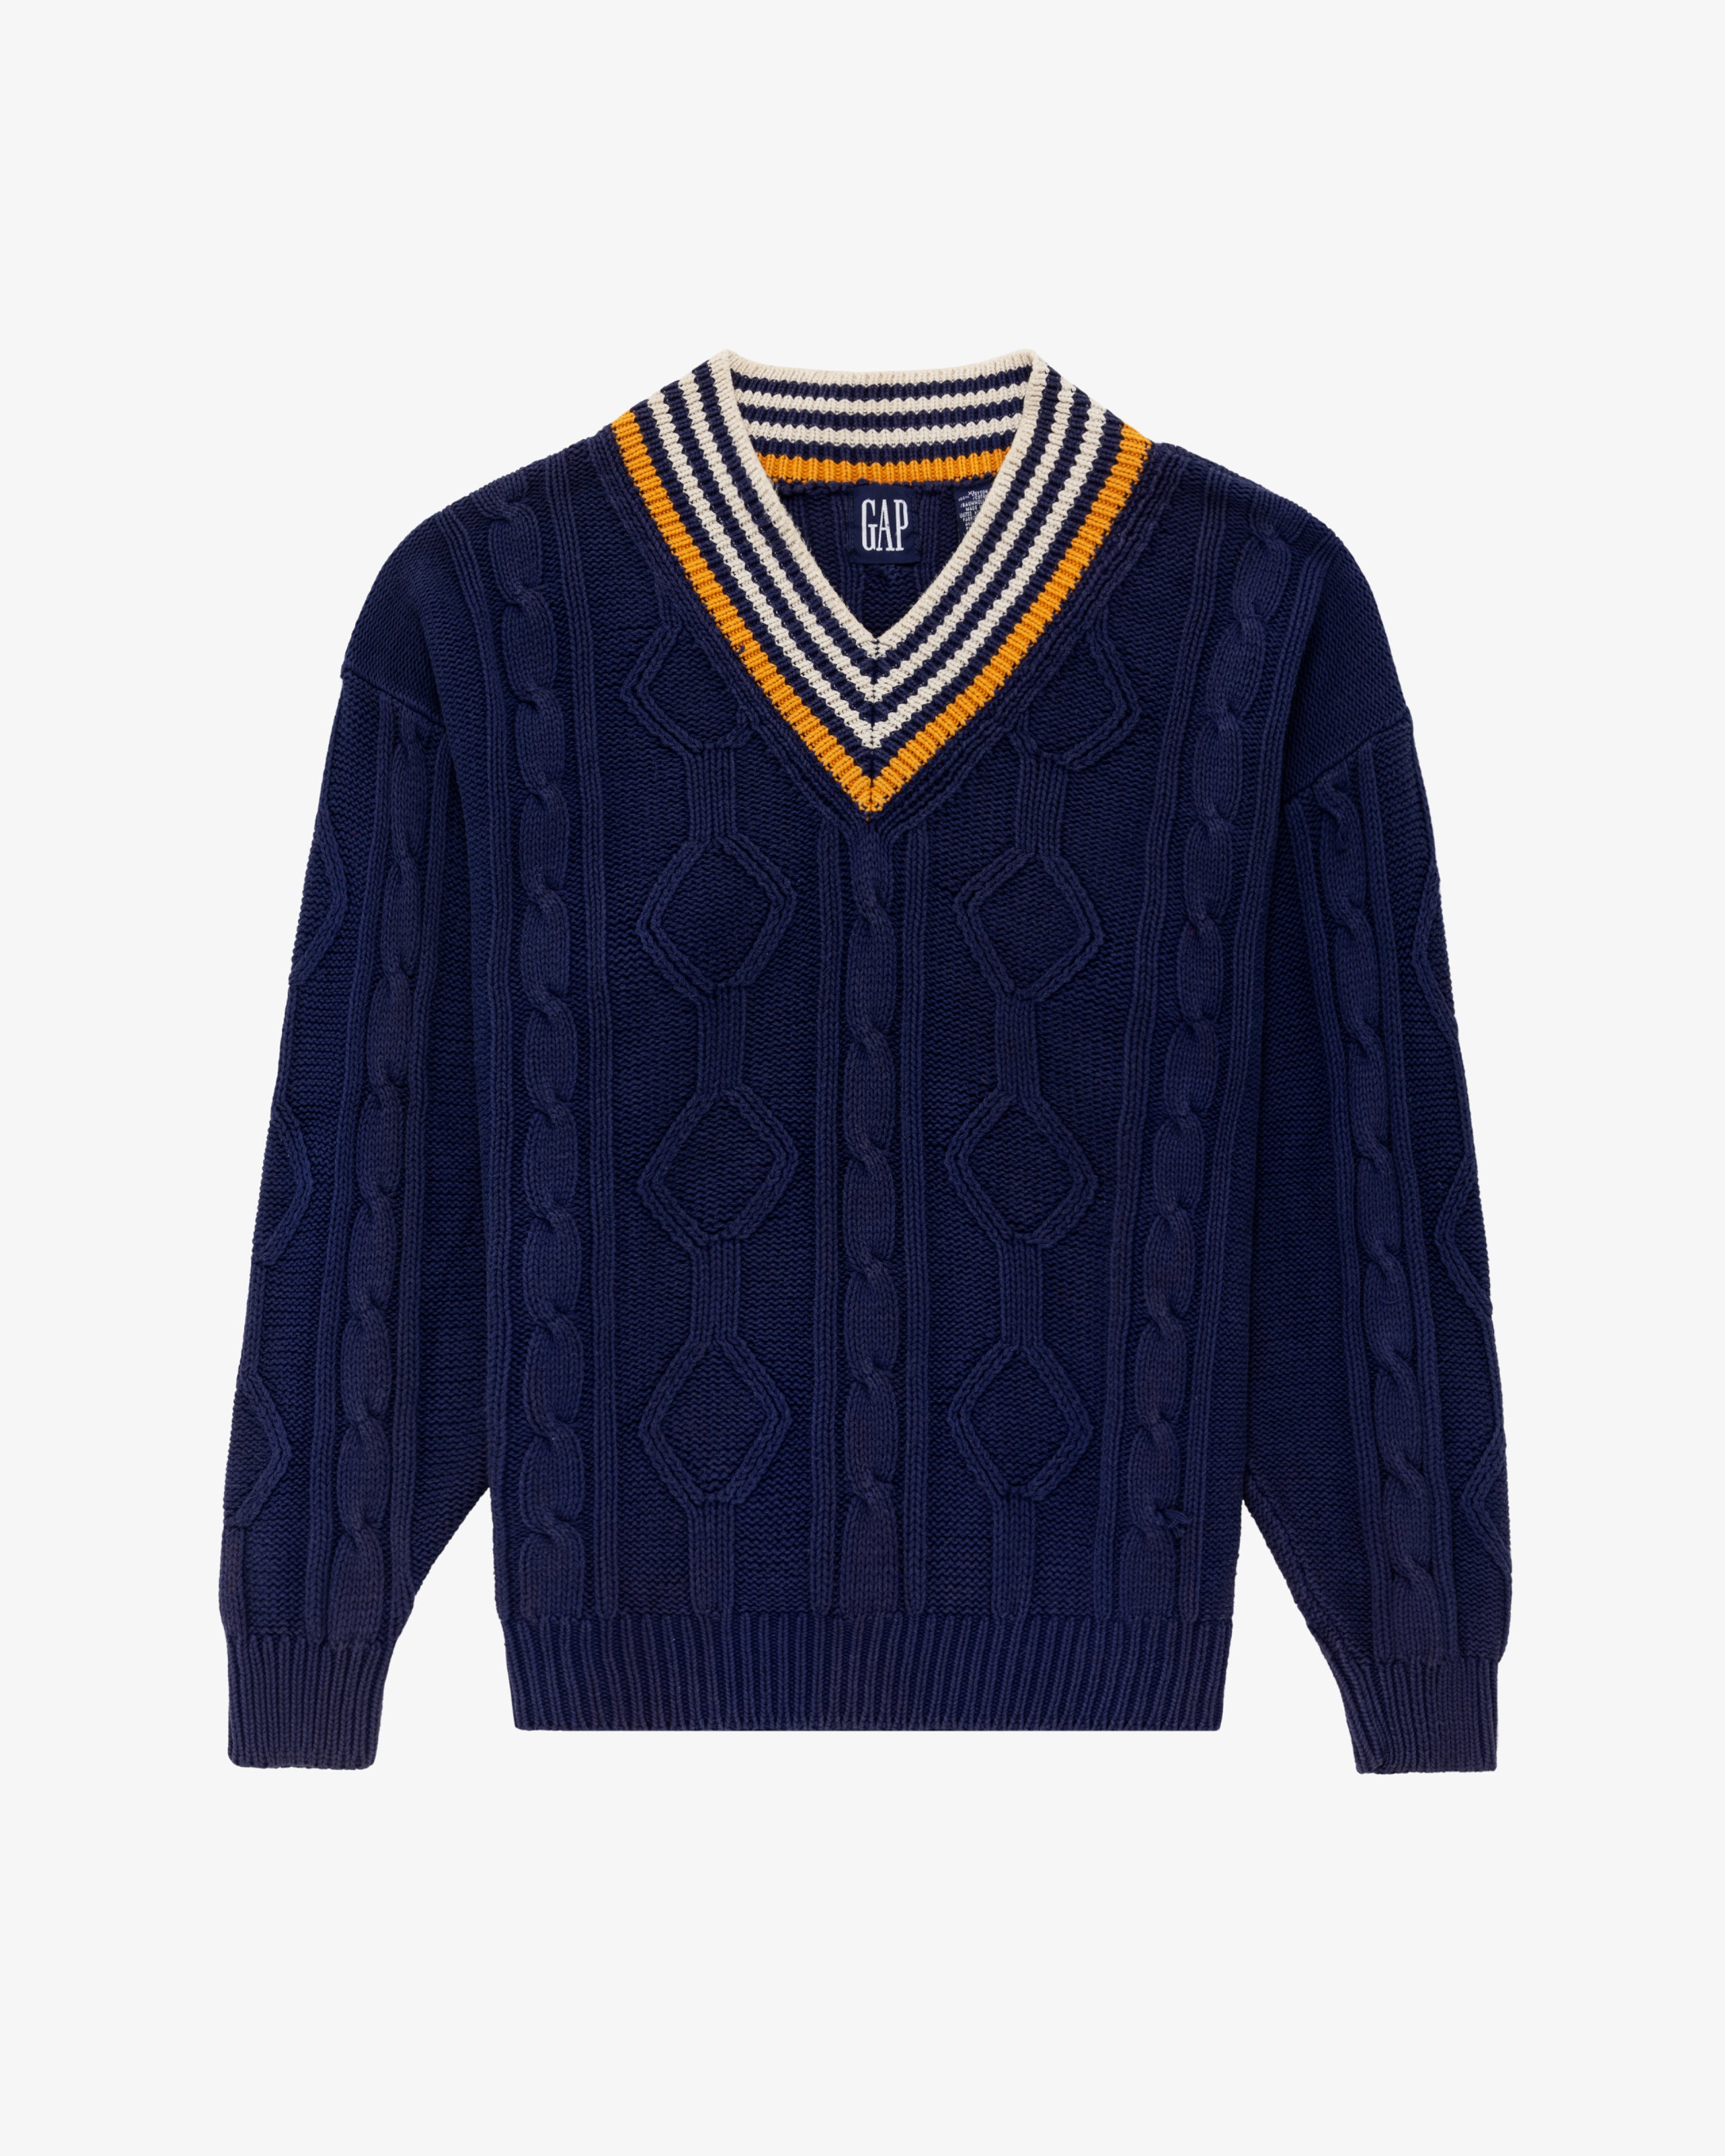 Vintage Gap Cable Knit Sweater